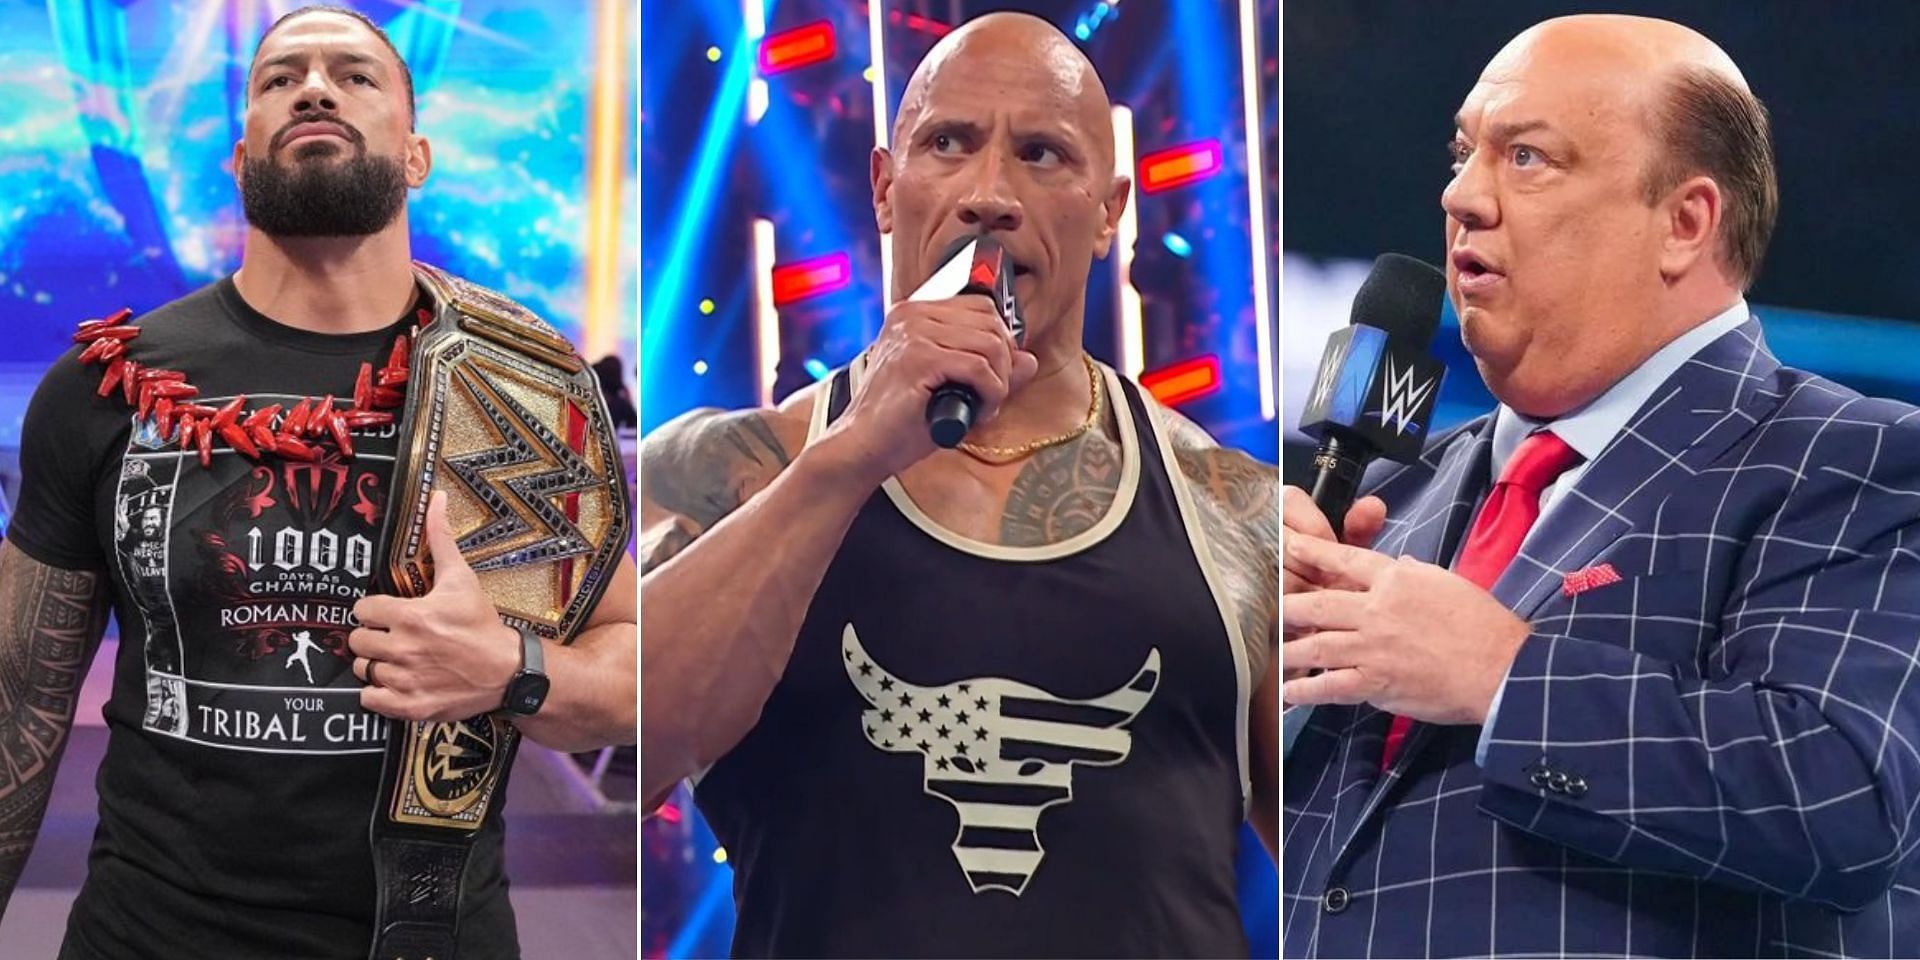 Paul Heyman addressed The Rock calling out Roman Reigns